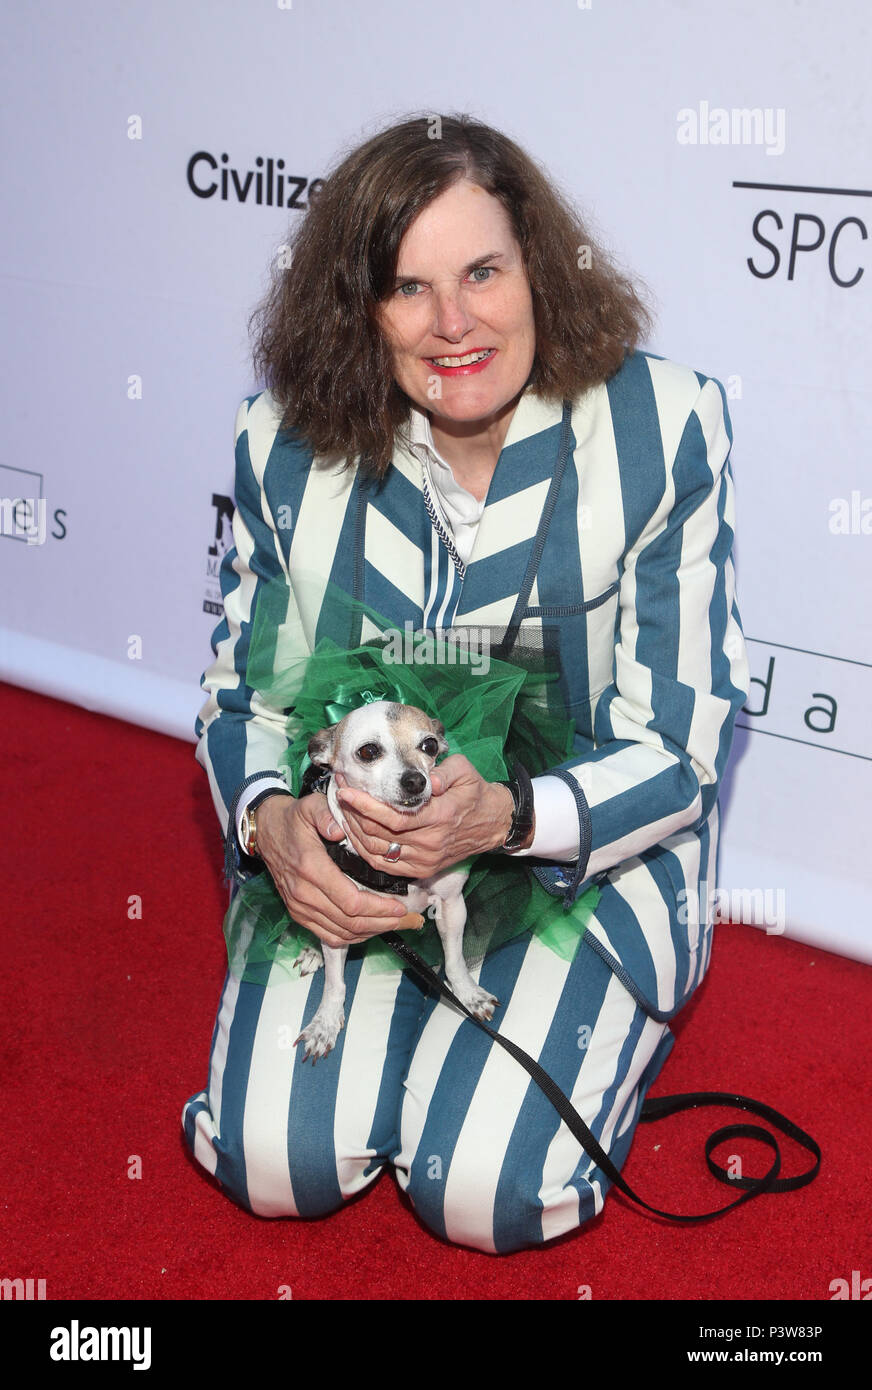 Hollywood, USA. 19th June, 2018. Paula Poundstone, at the Los Angeles Premiere of Boundaries at the Egyptian Theatre in Hollywood, California on June 19, 2018. Credit: Faye Sadou/Media Punch/Alamy Live News Stock Photo